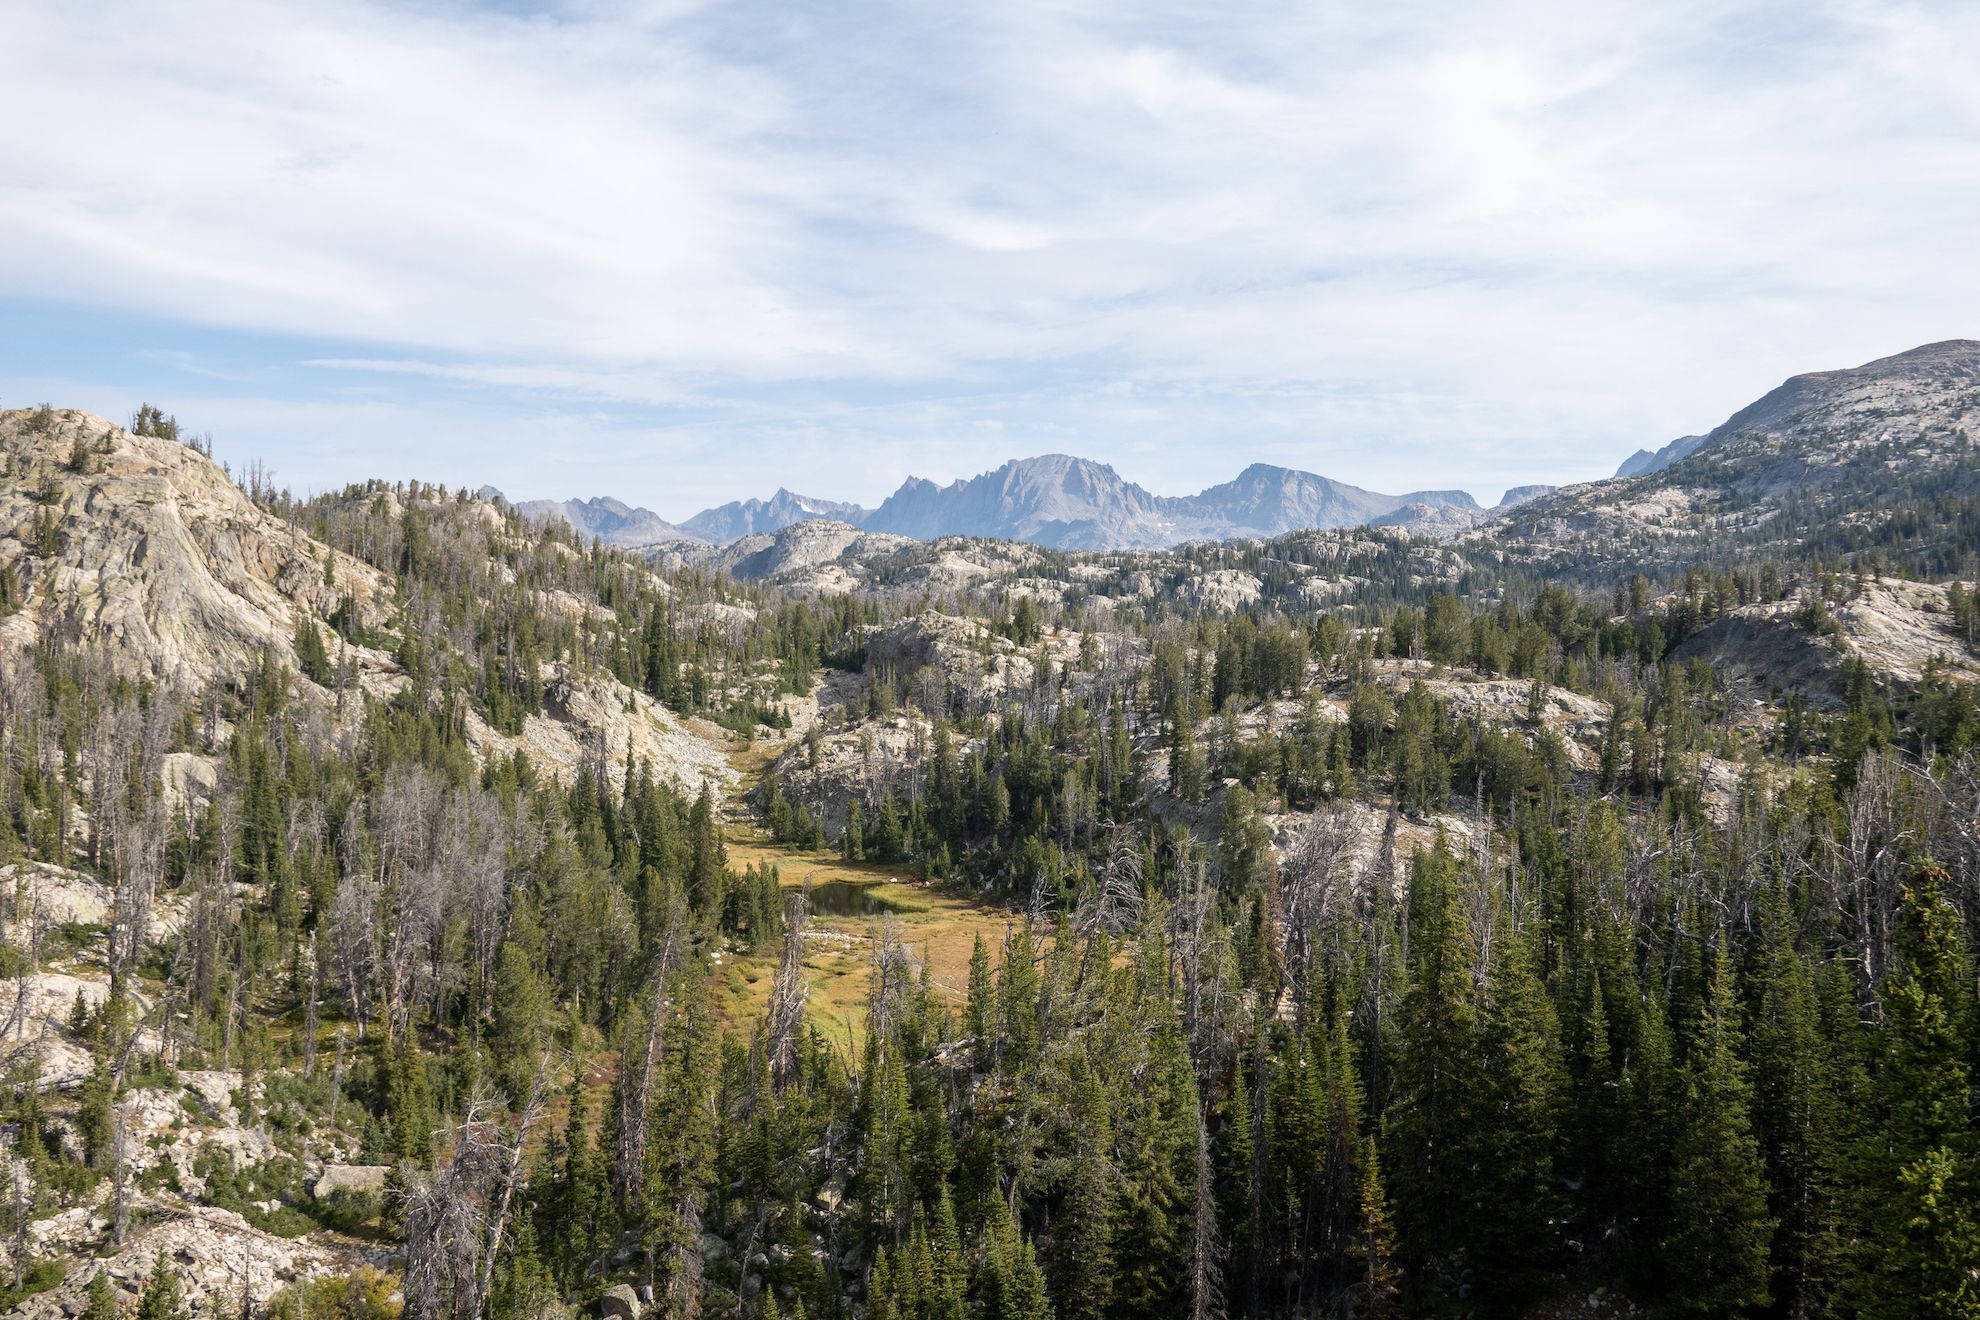 We spent close to four weeks in the Wind River range in Wyoming during the month of September and the beginning of October.